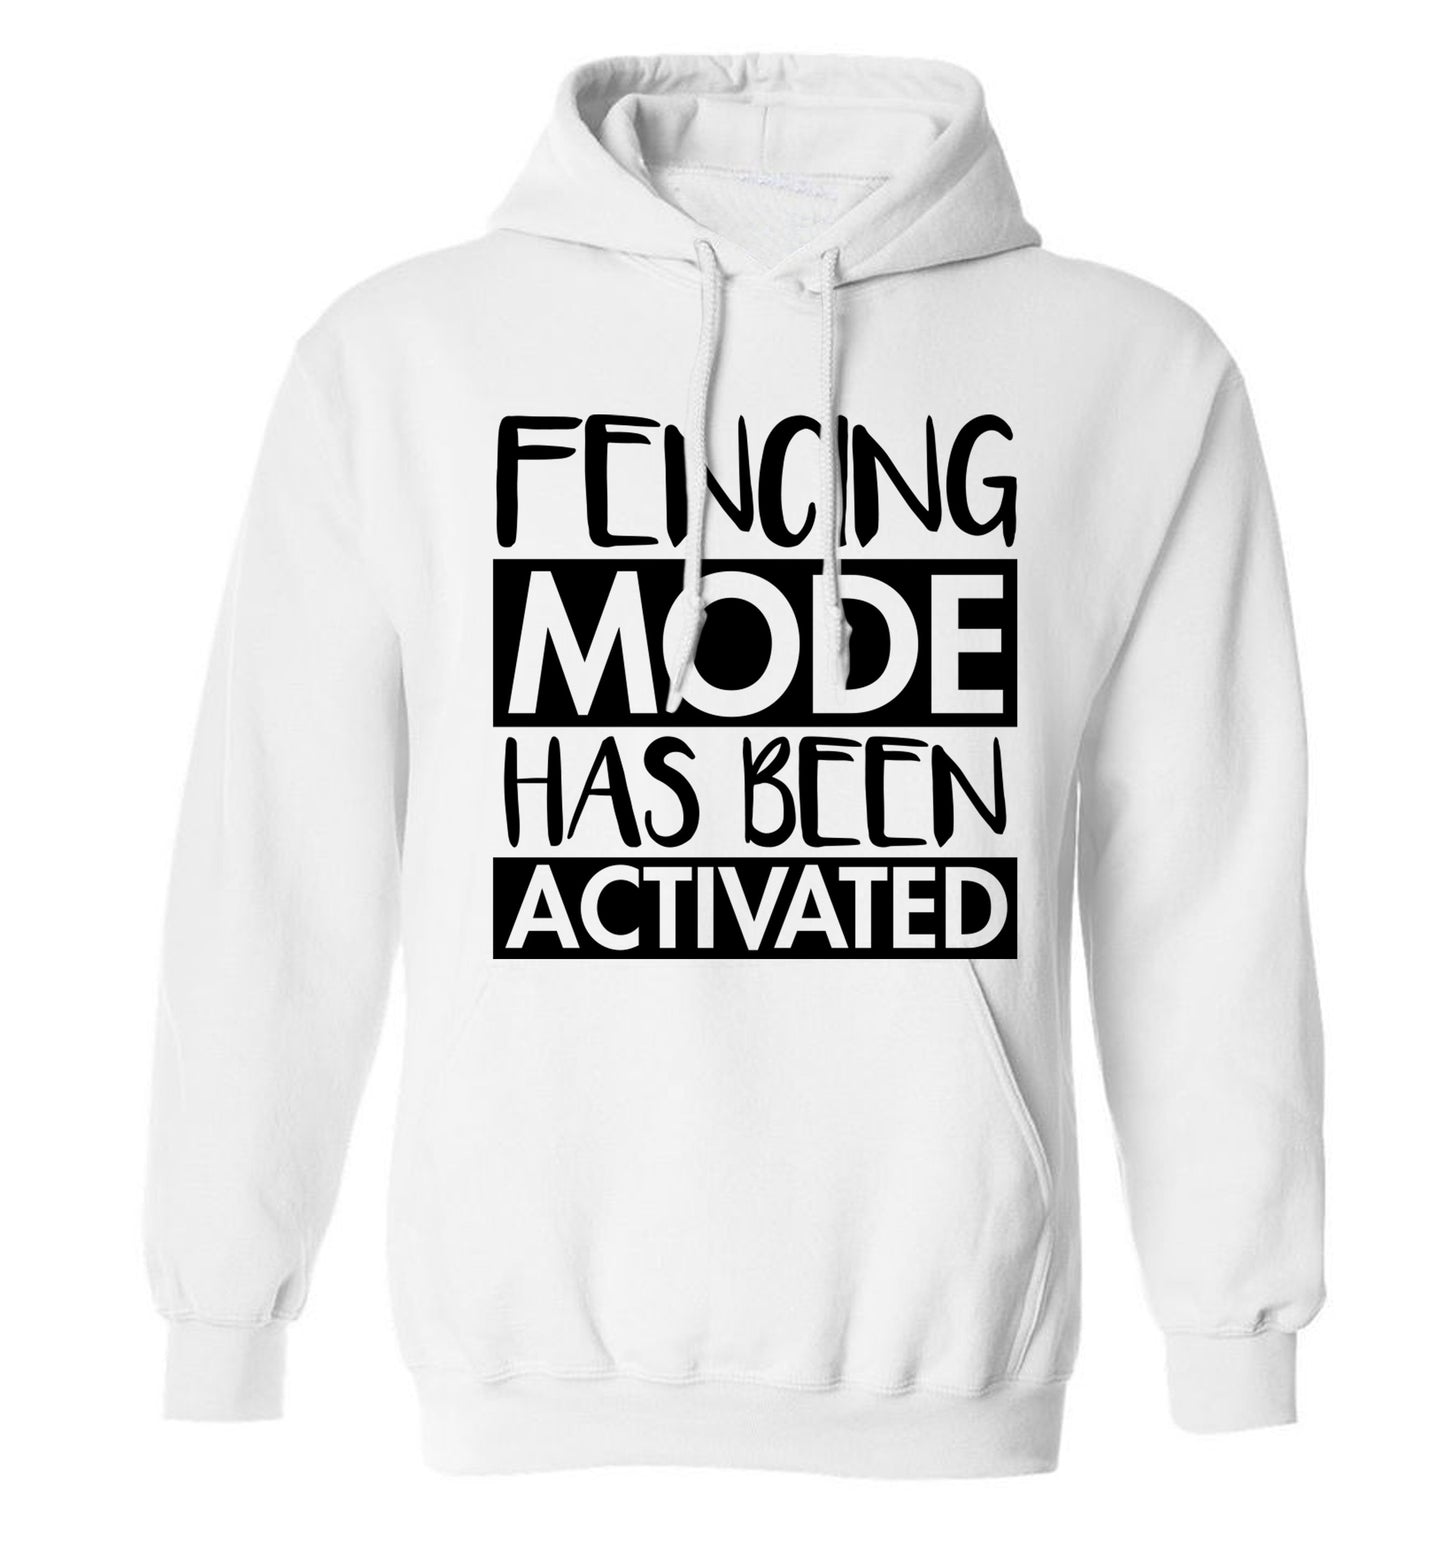 Fencing mode activated adults unisex white hoodie 2XL